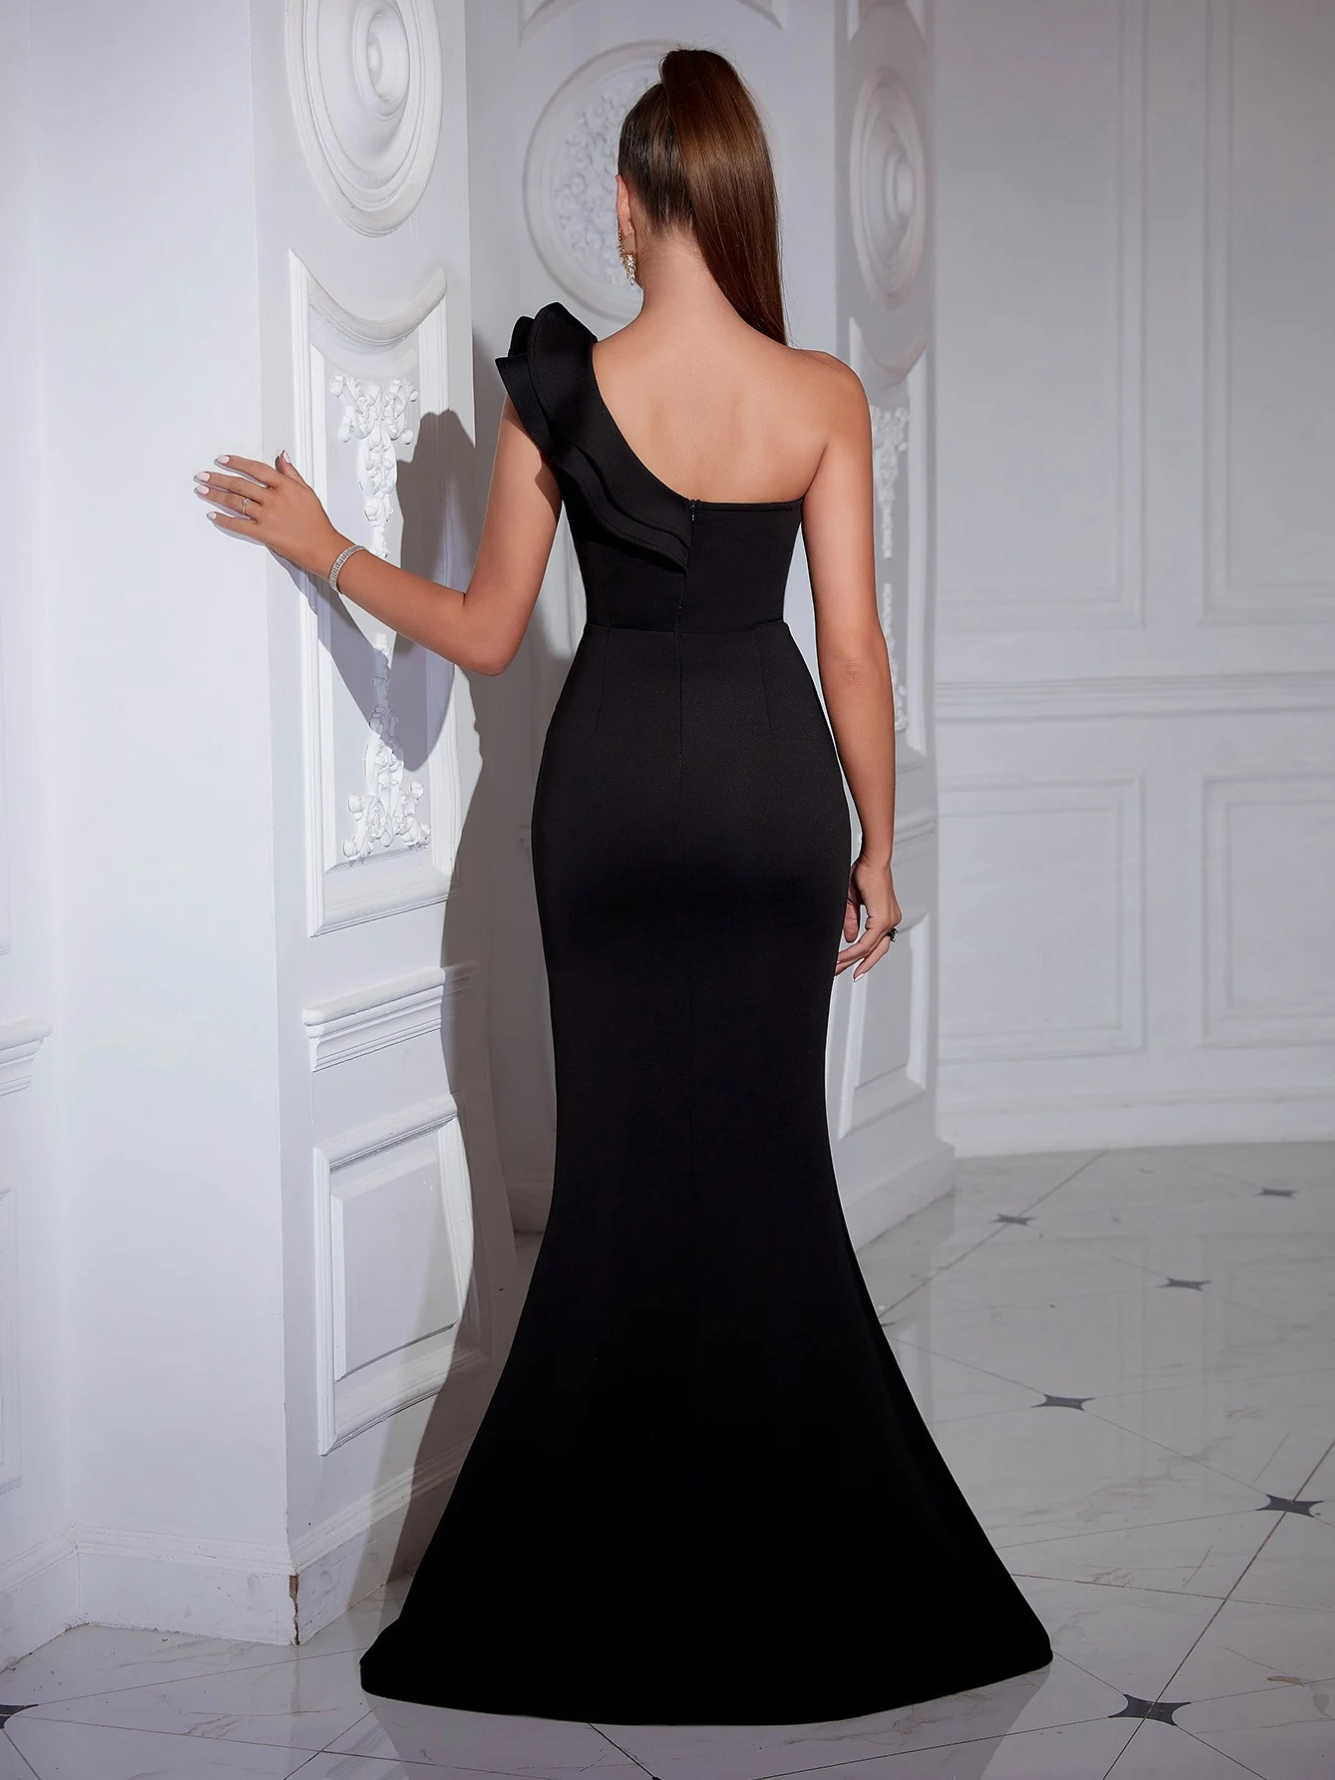 Woman with her back turned wearing a black one-shoulder evening gown showing her back.